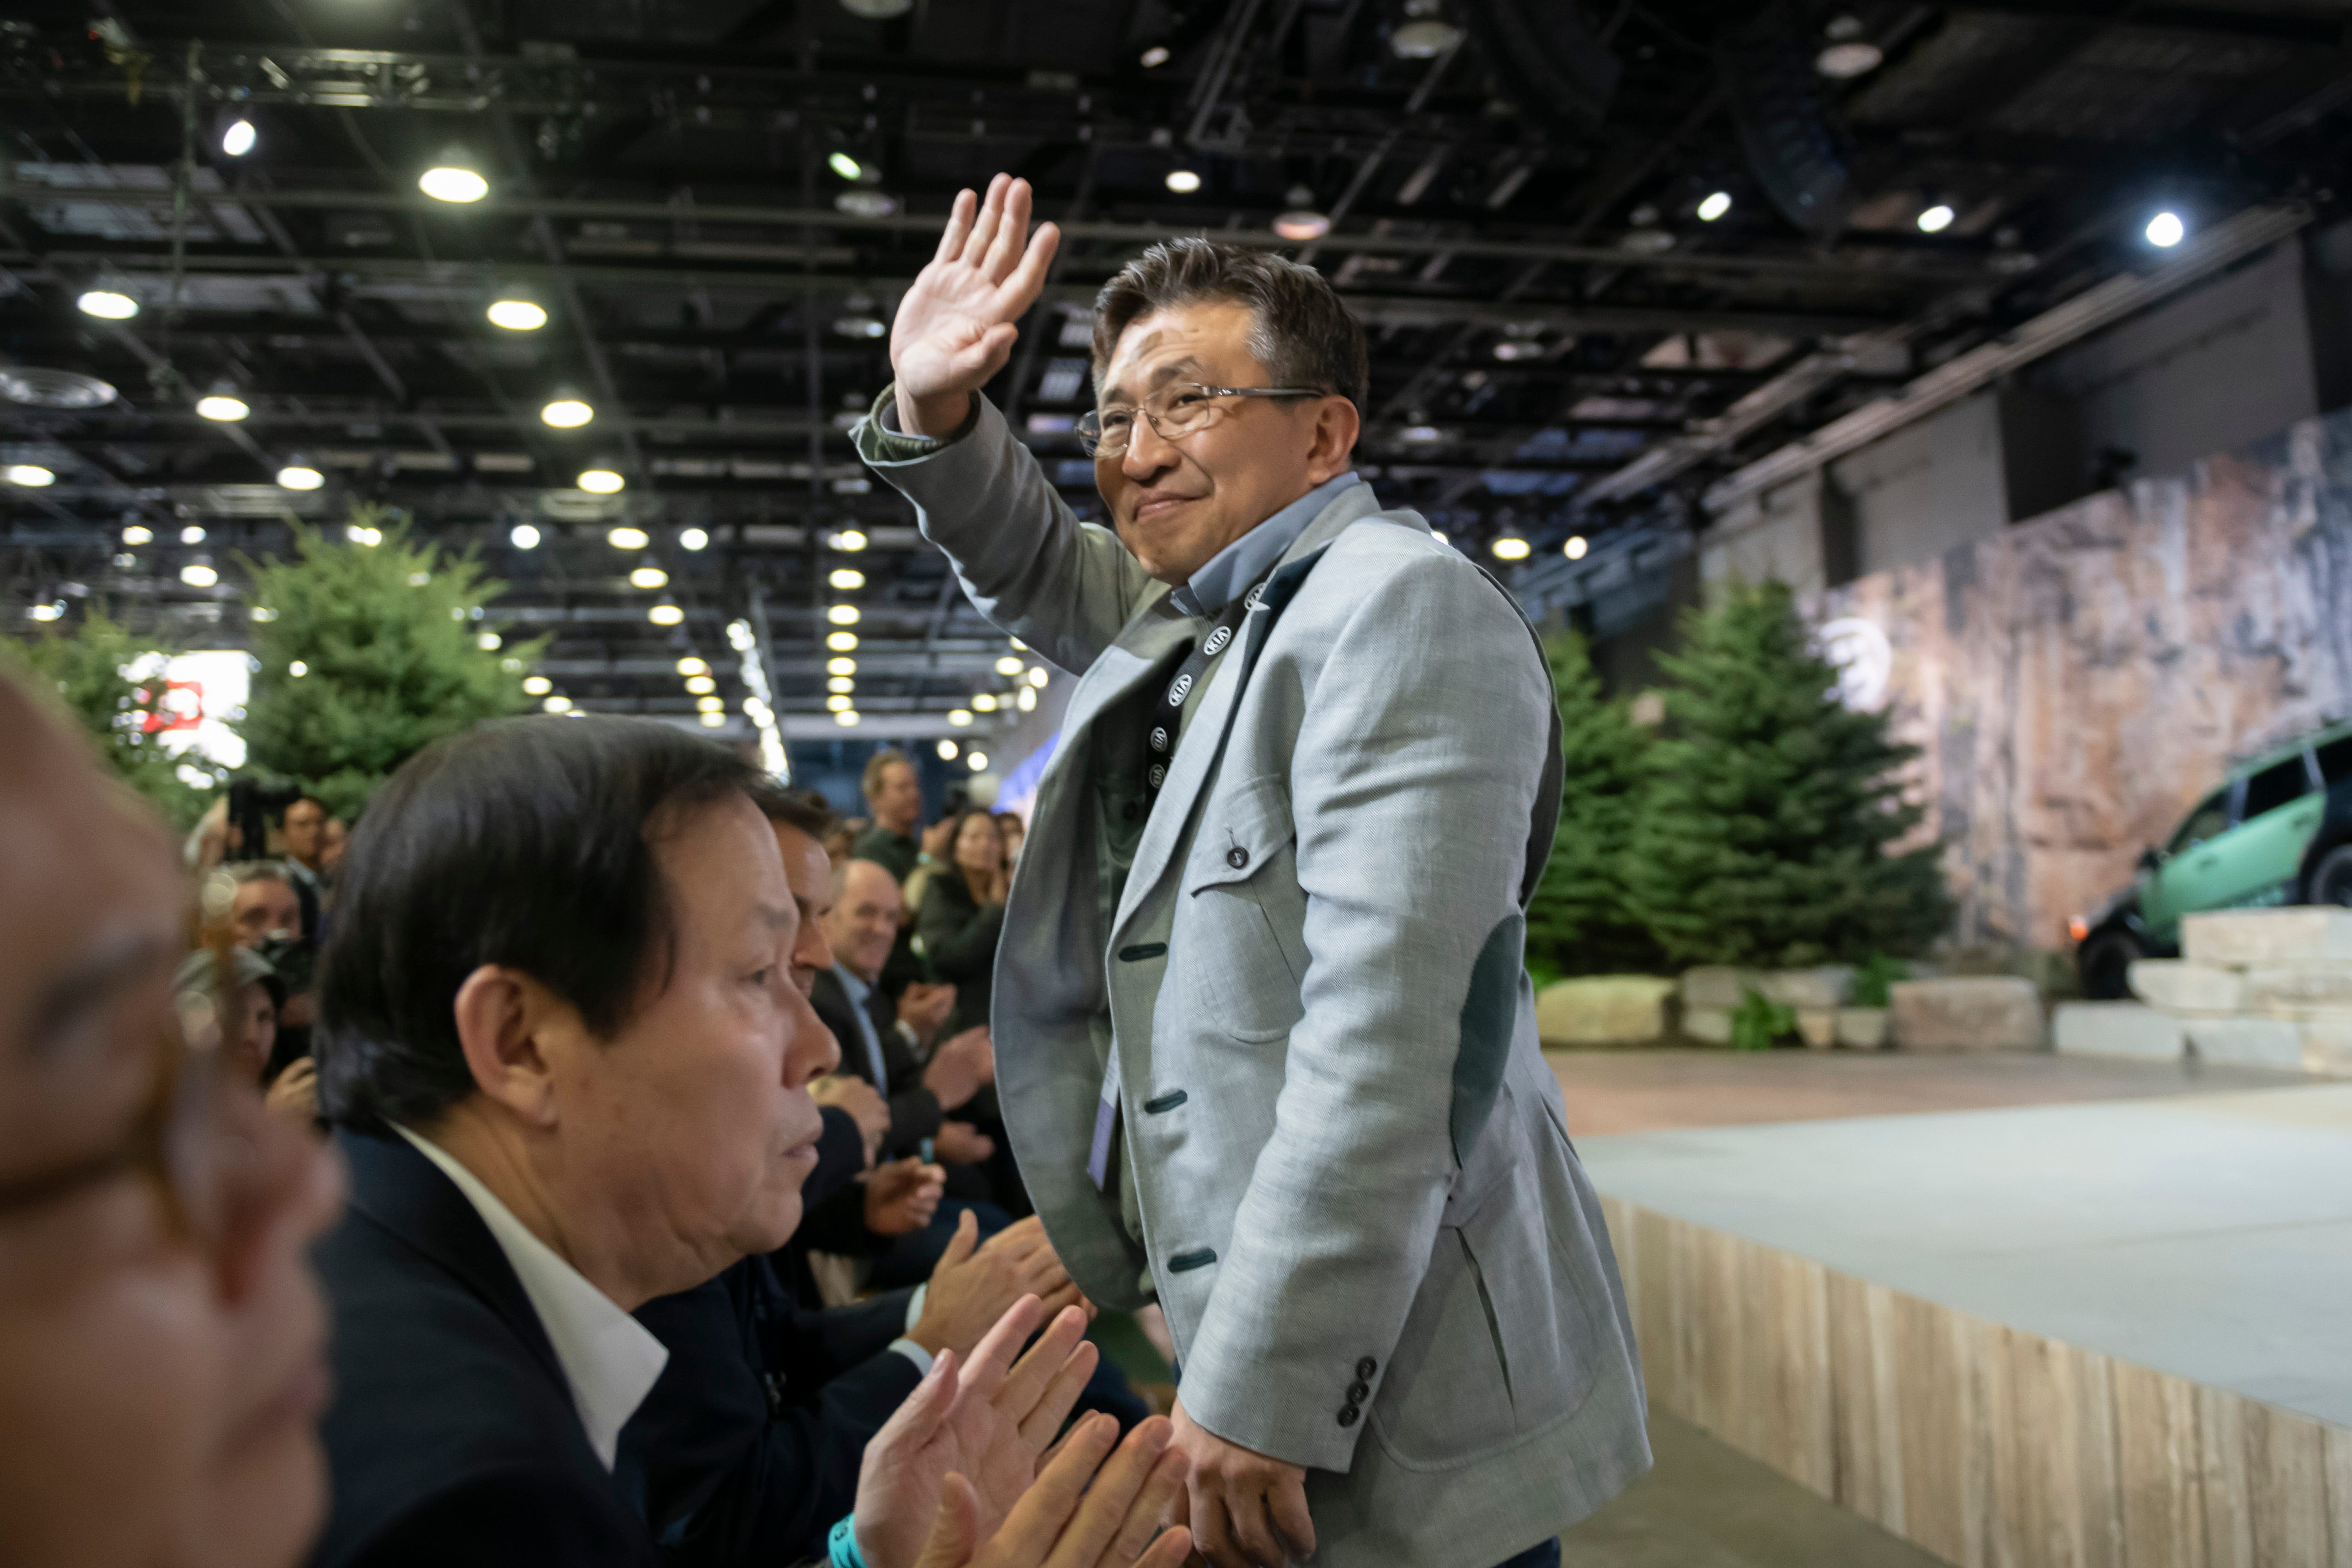 Seungkyu (Sean) Yoon, president and CEO of Kia Motors America, waves to the gathered journalists during the 2020 Kia Telluride reveal.